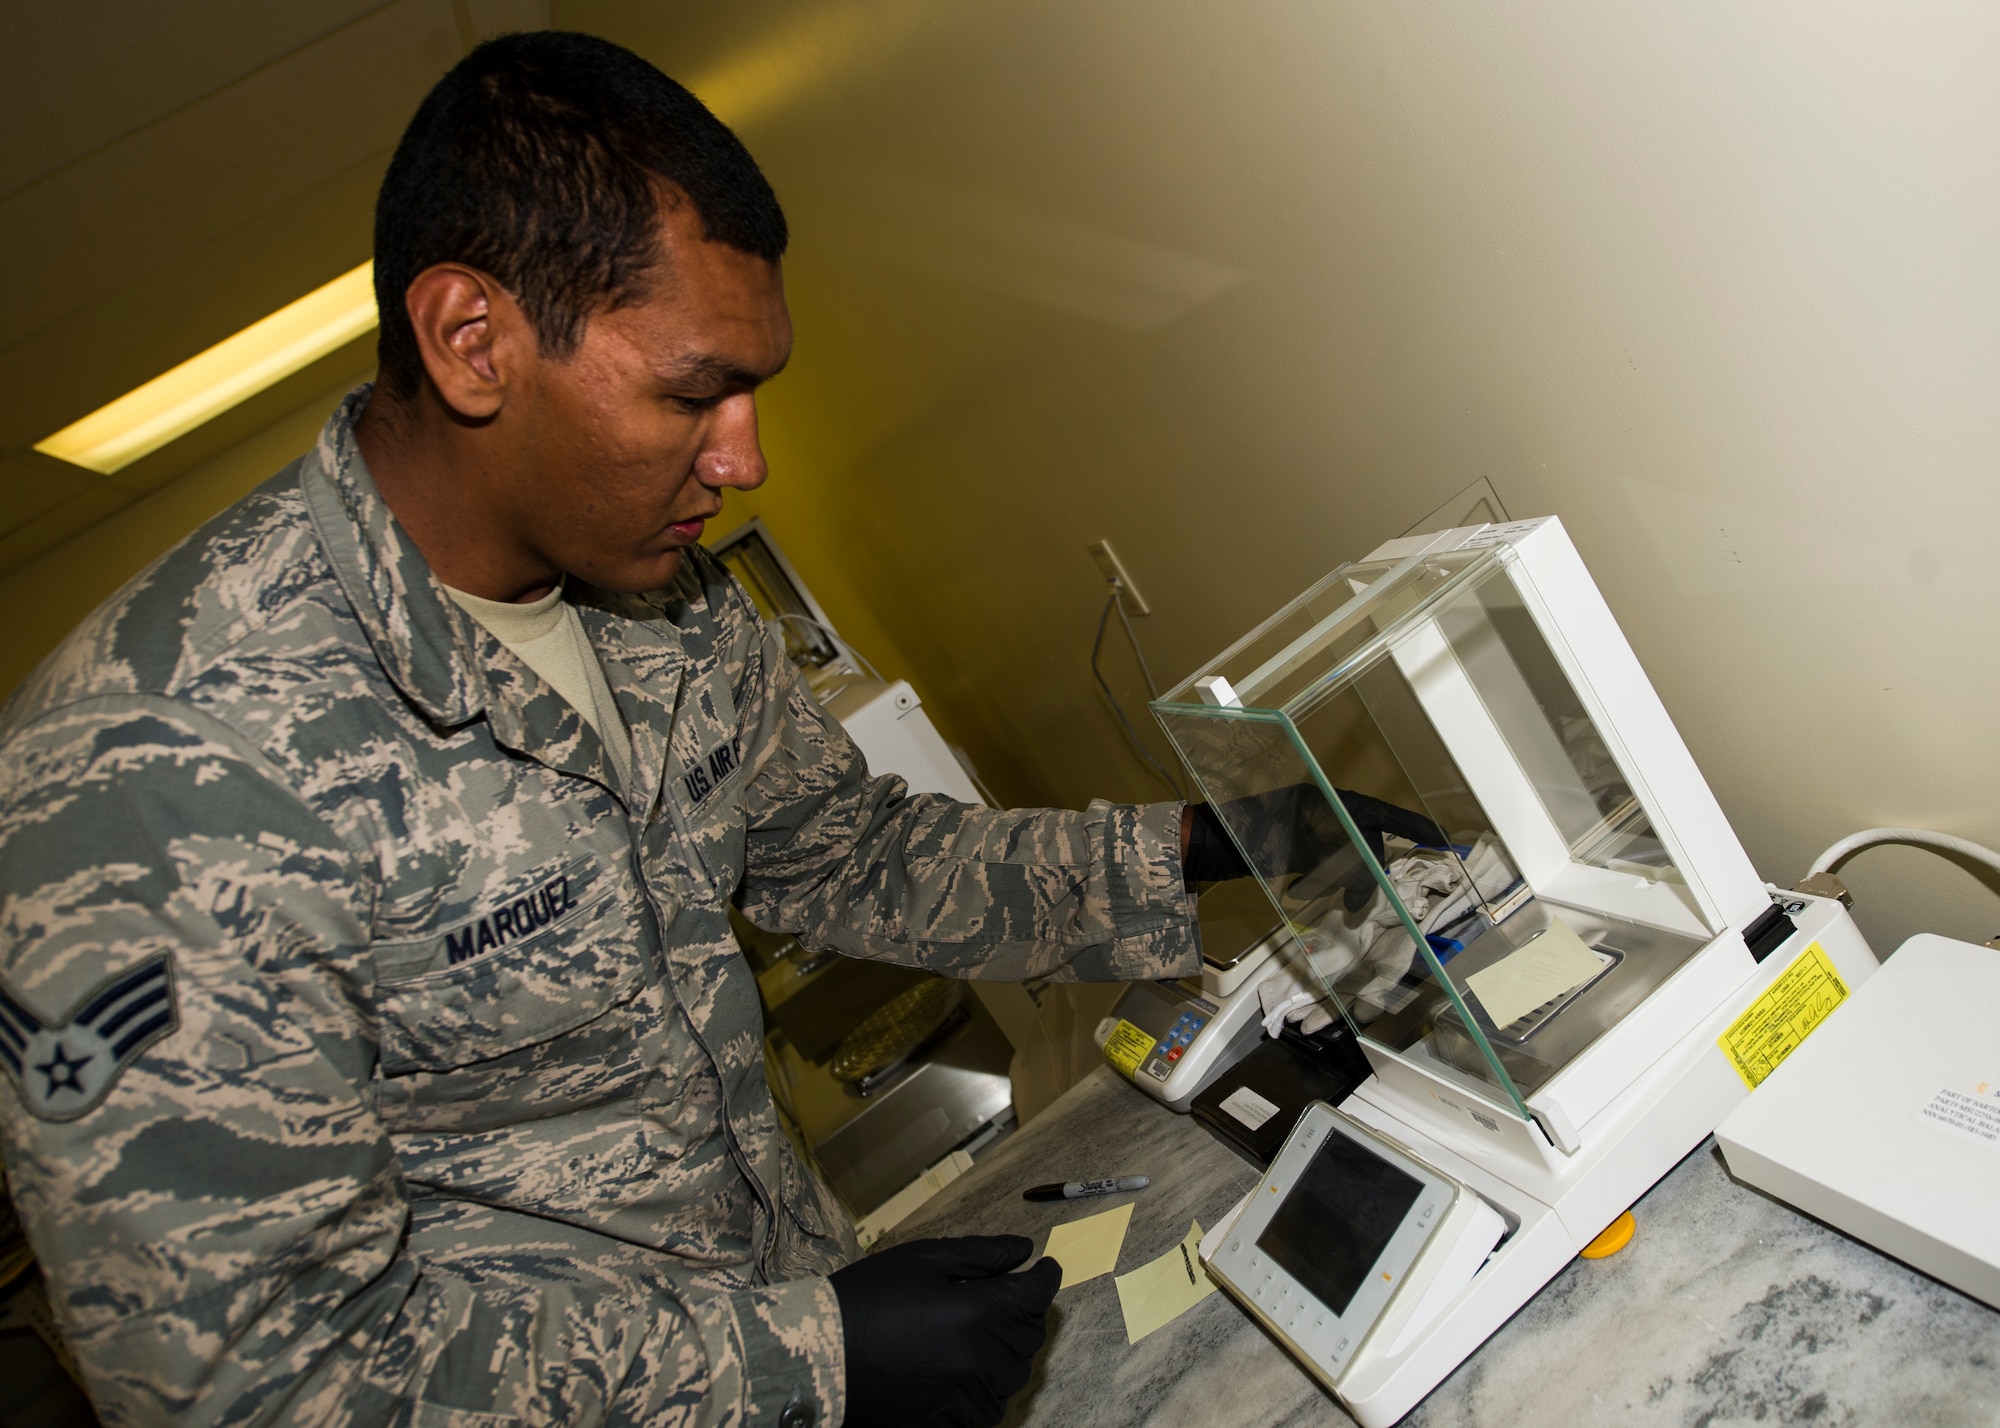 Senior Airman Troy Marquez, 49th Maintenance Squadron Precision Measurement Equipment Laboratory technician, zeros out an analytical balance at PMEL May 28, 2015 at Holloman Air Force Base, N.M. The analytical balance is an extremely accurate scale. It is so accurate that it can measure how much a signature on a sticky note weighs. (U.S. Air Force photo by Airman 1st Class Emily A. Kenney/Released)